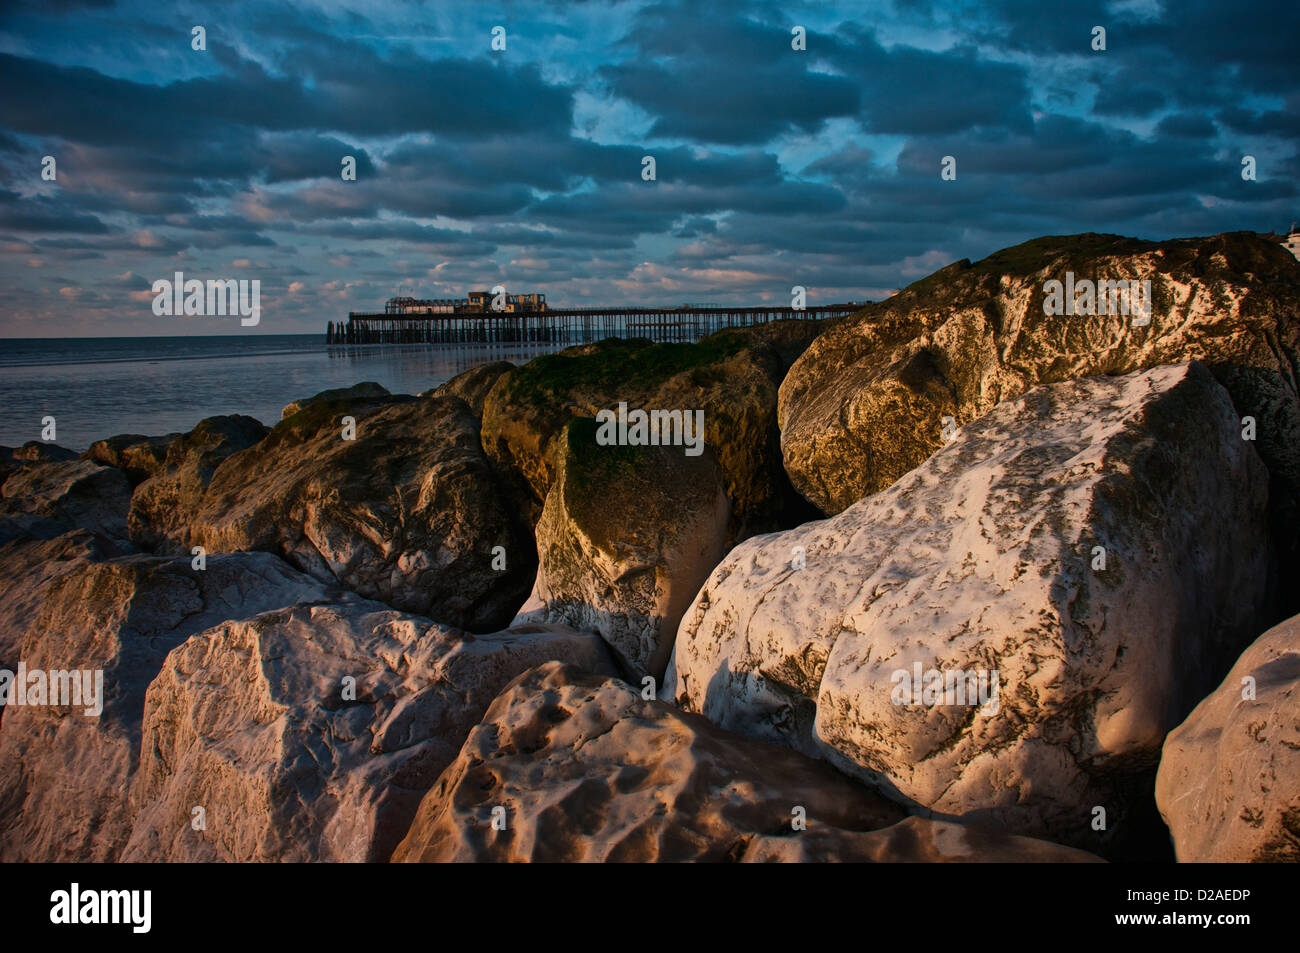 hastings seafront in january at sunrise showing the pier and beach rocks blue sky sea sand tide out Stock Photo